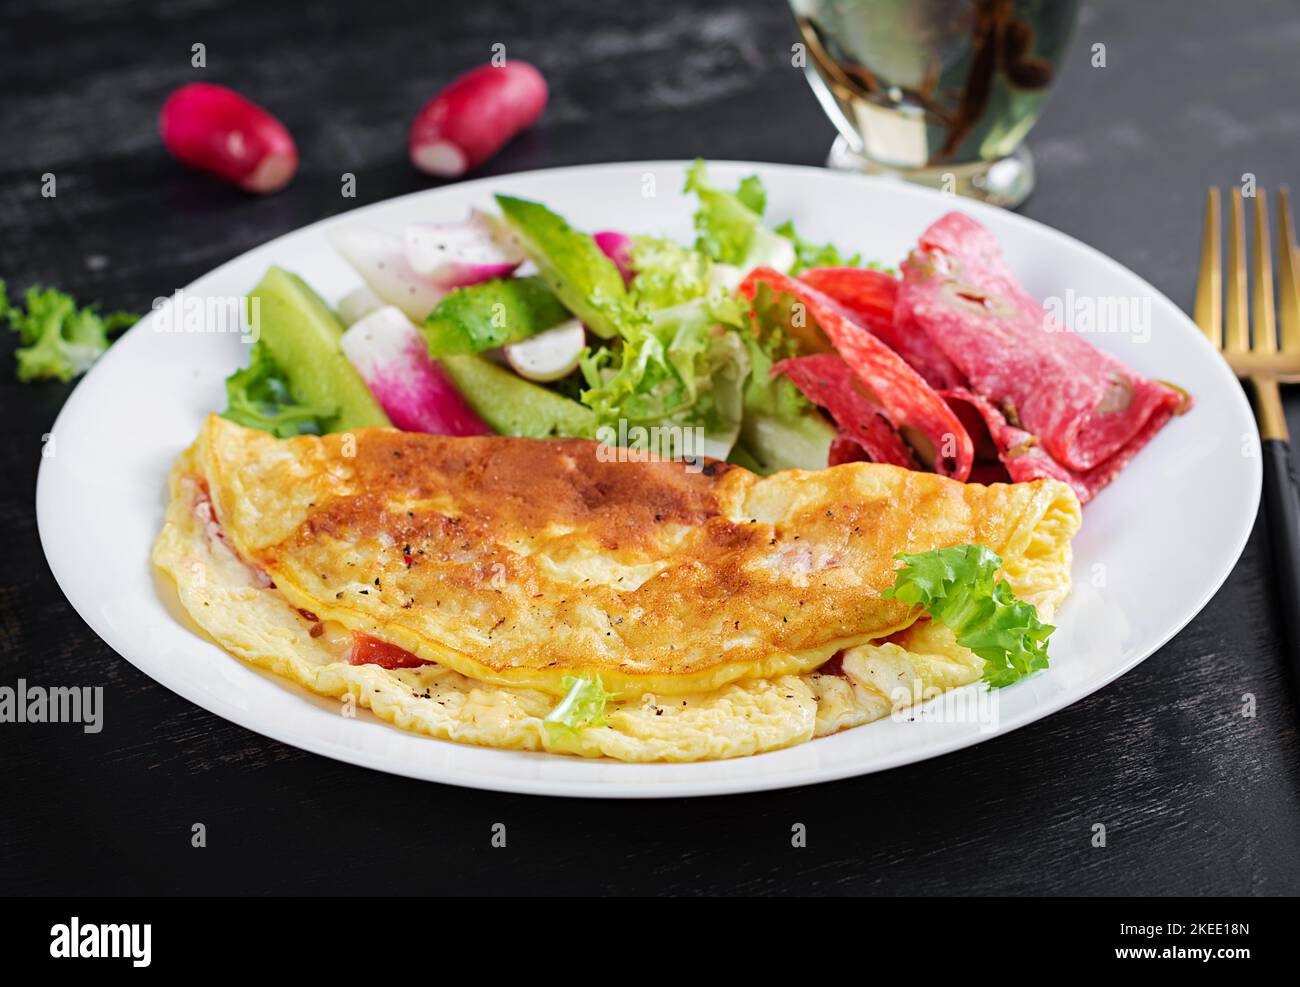 Breakfast. Omelette with cheese and  fresh salad, salami. Frittata - italian omelet. Ketogenic lunch. Stock Photo